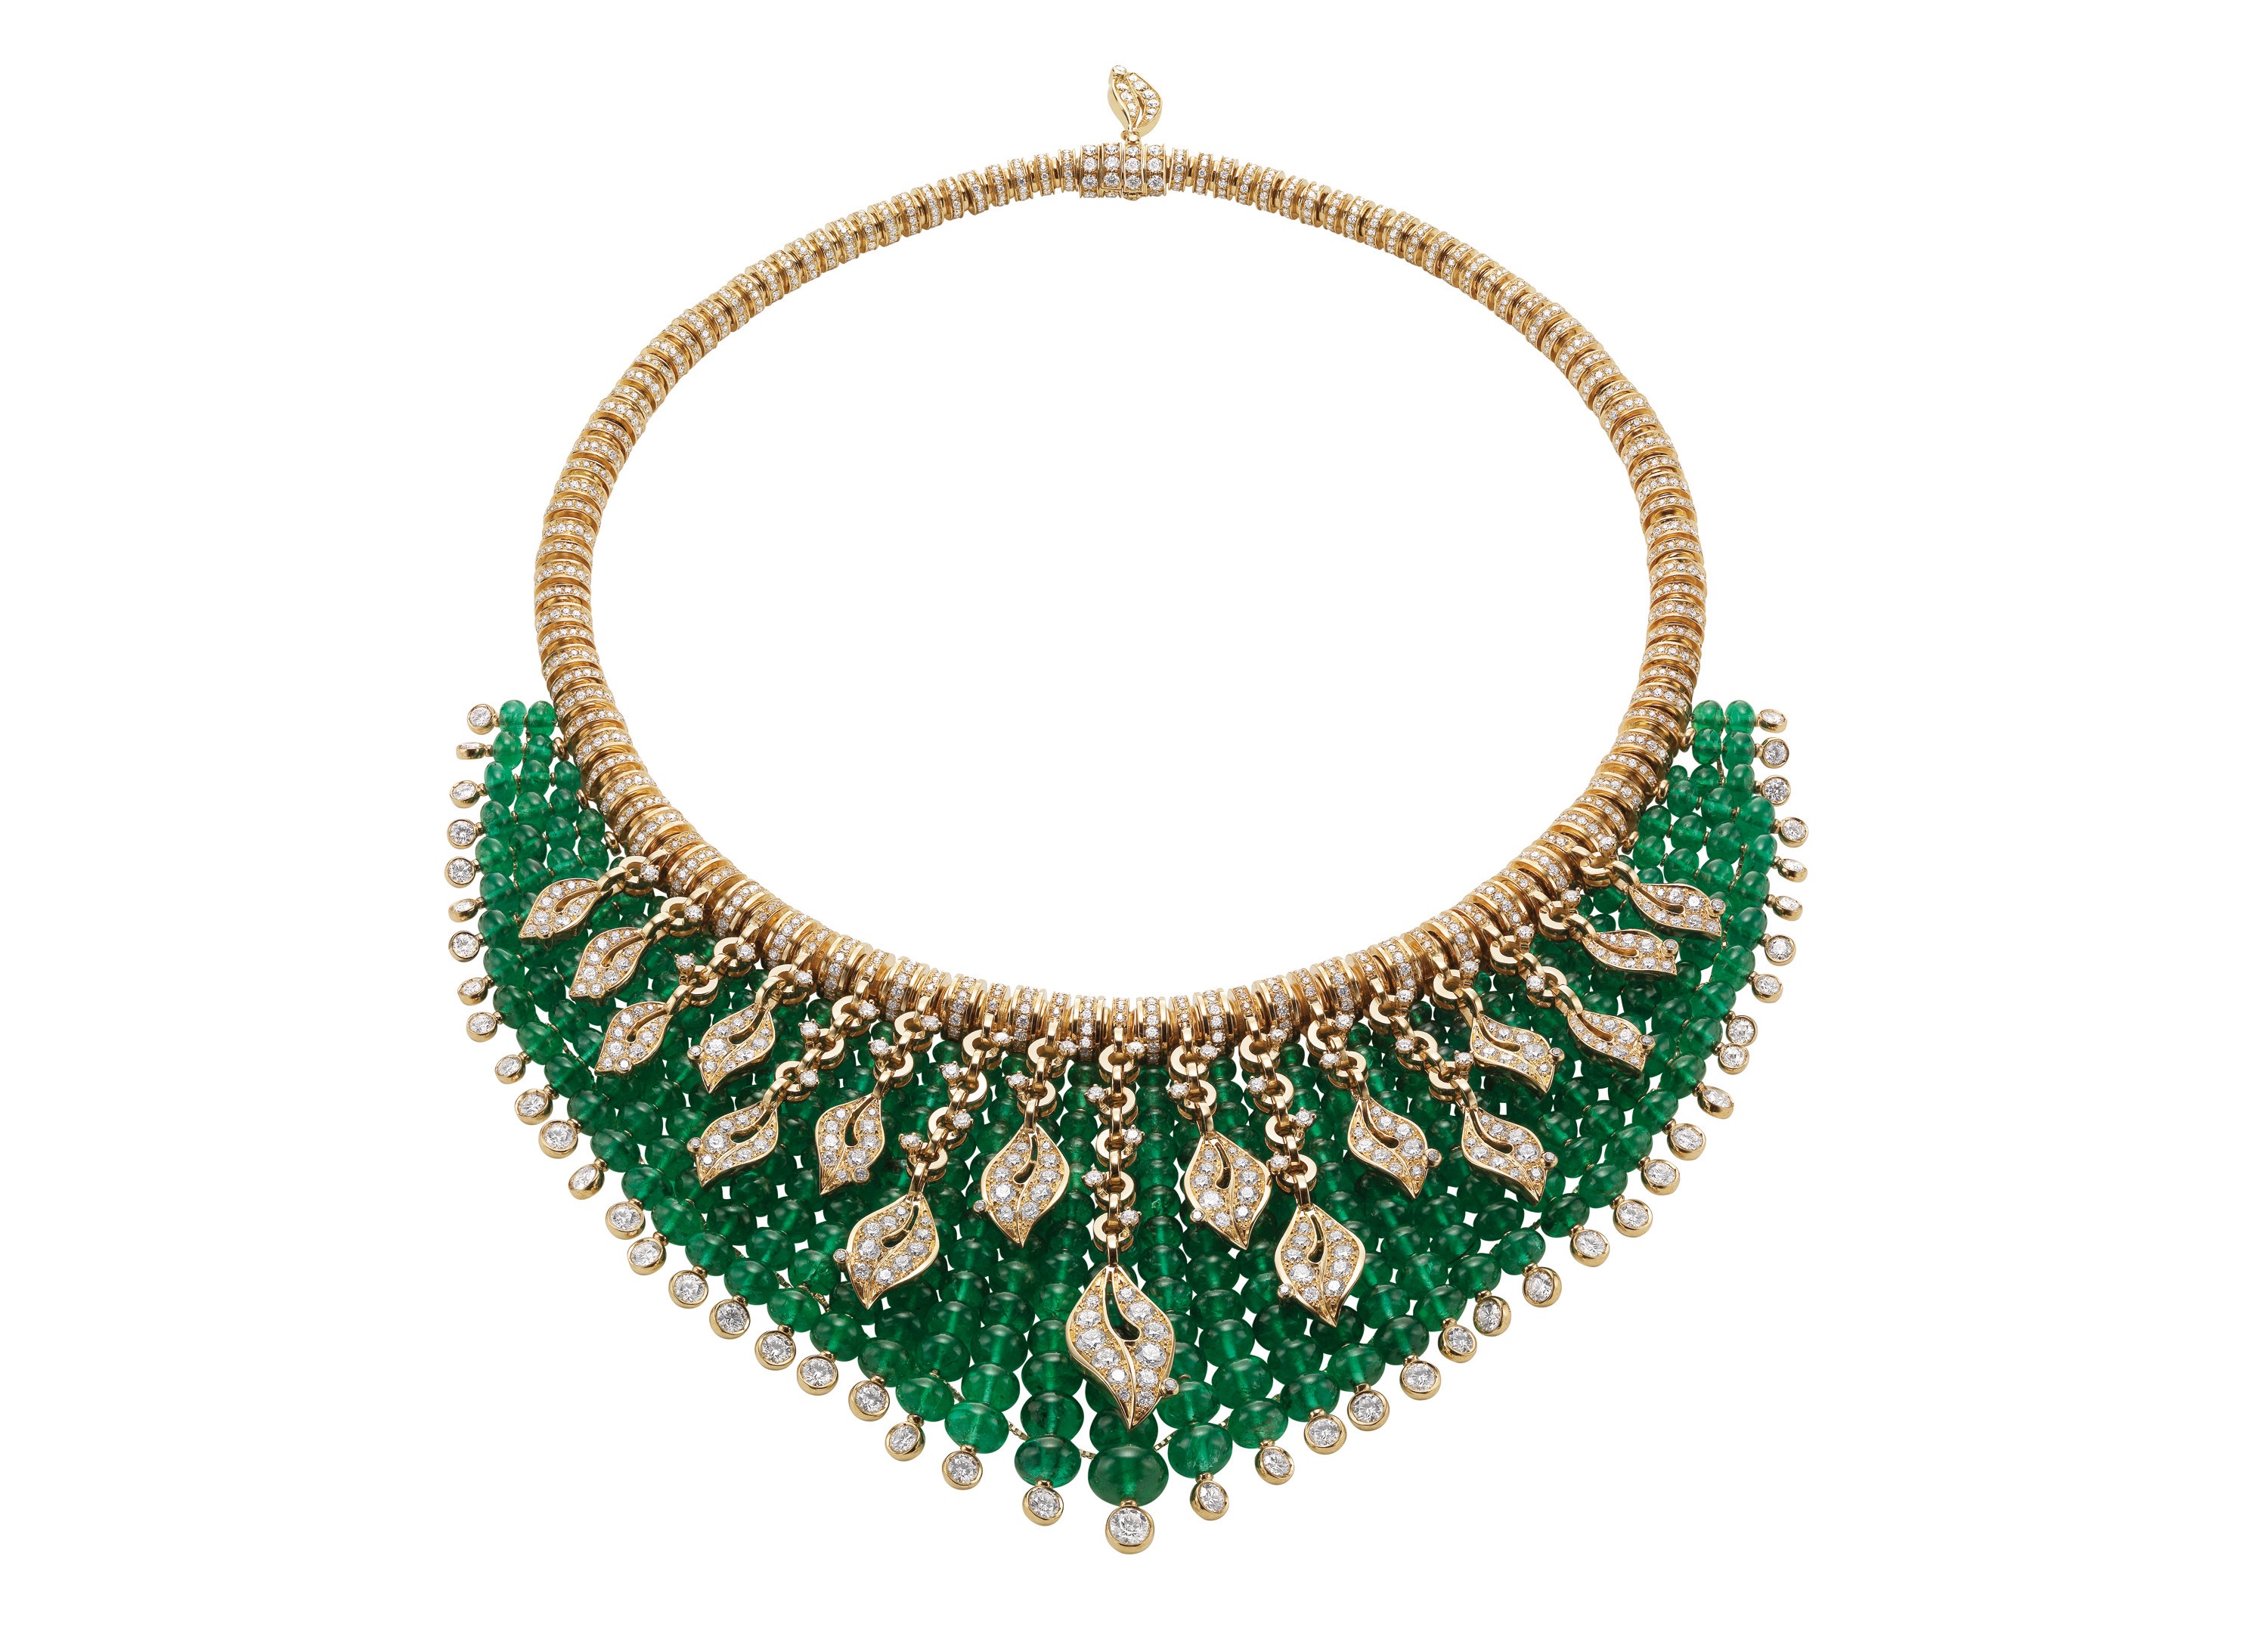 Giardini tialiani necklace made with 347 round emerald beads (total 245ct) and complemented with diamonds